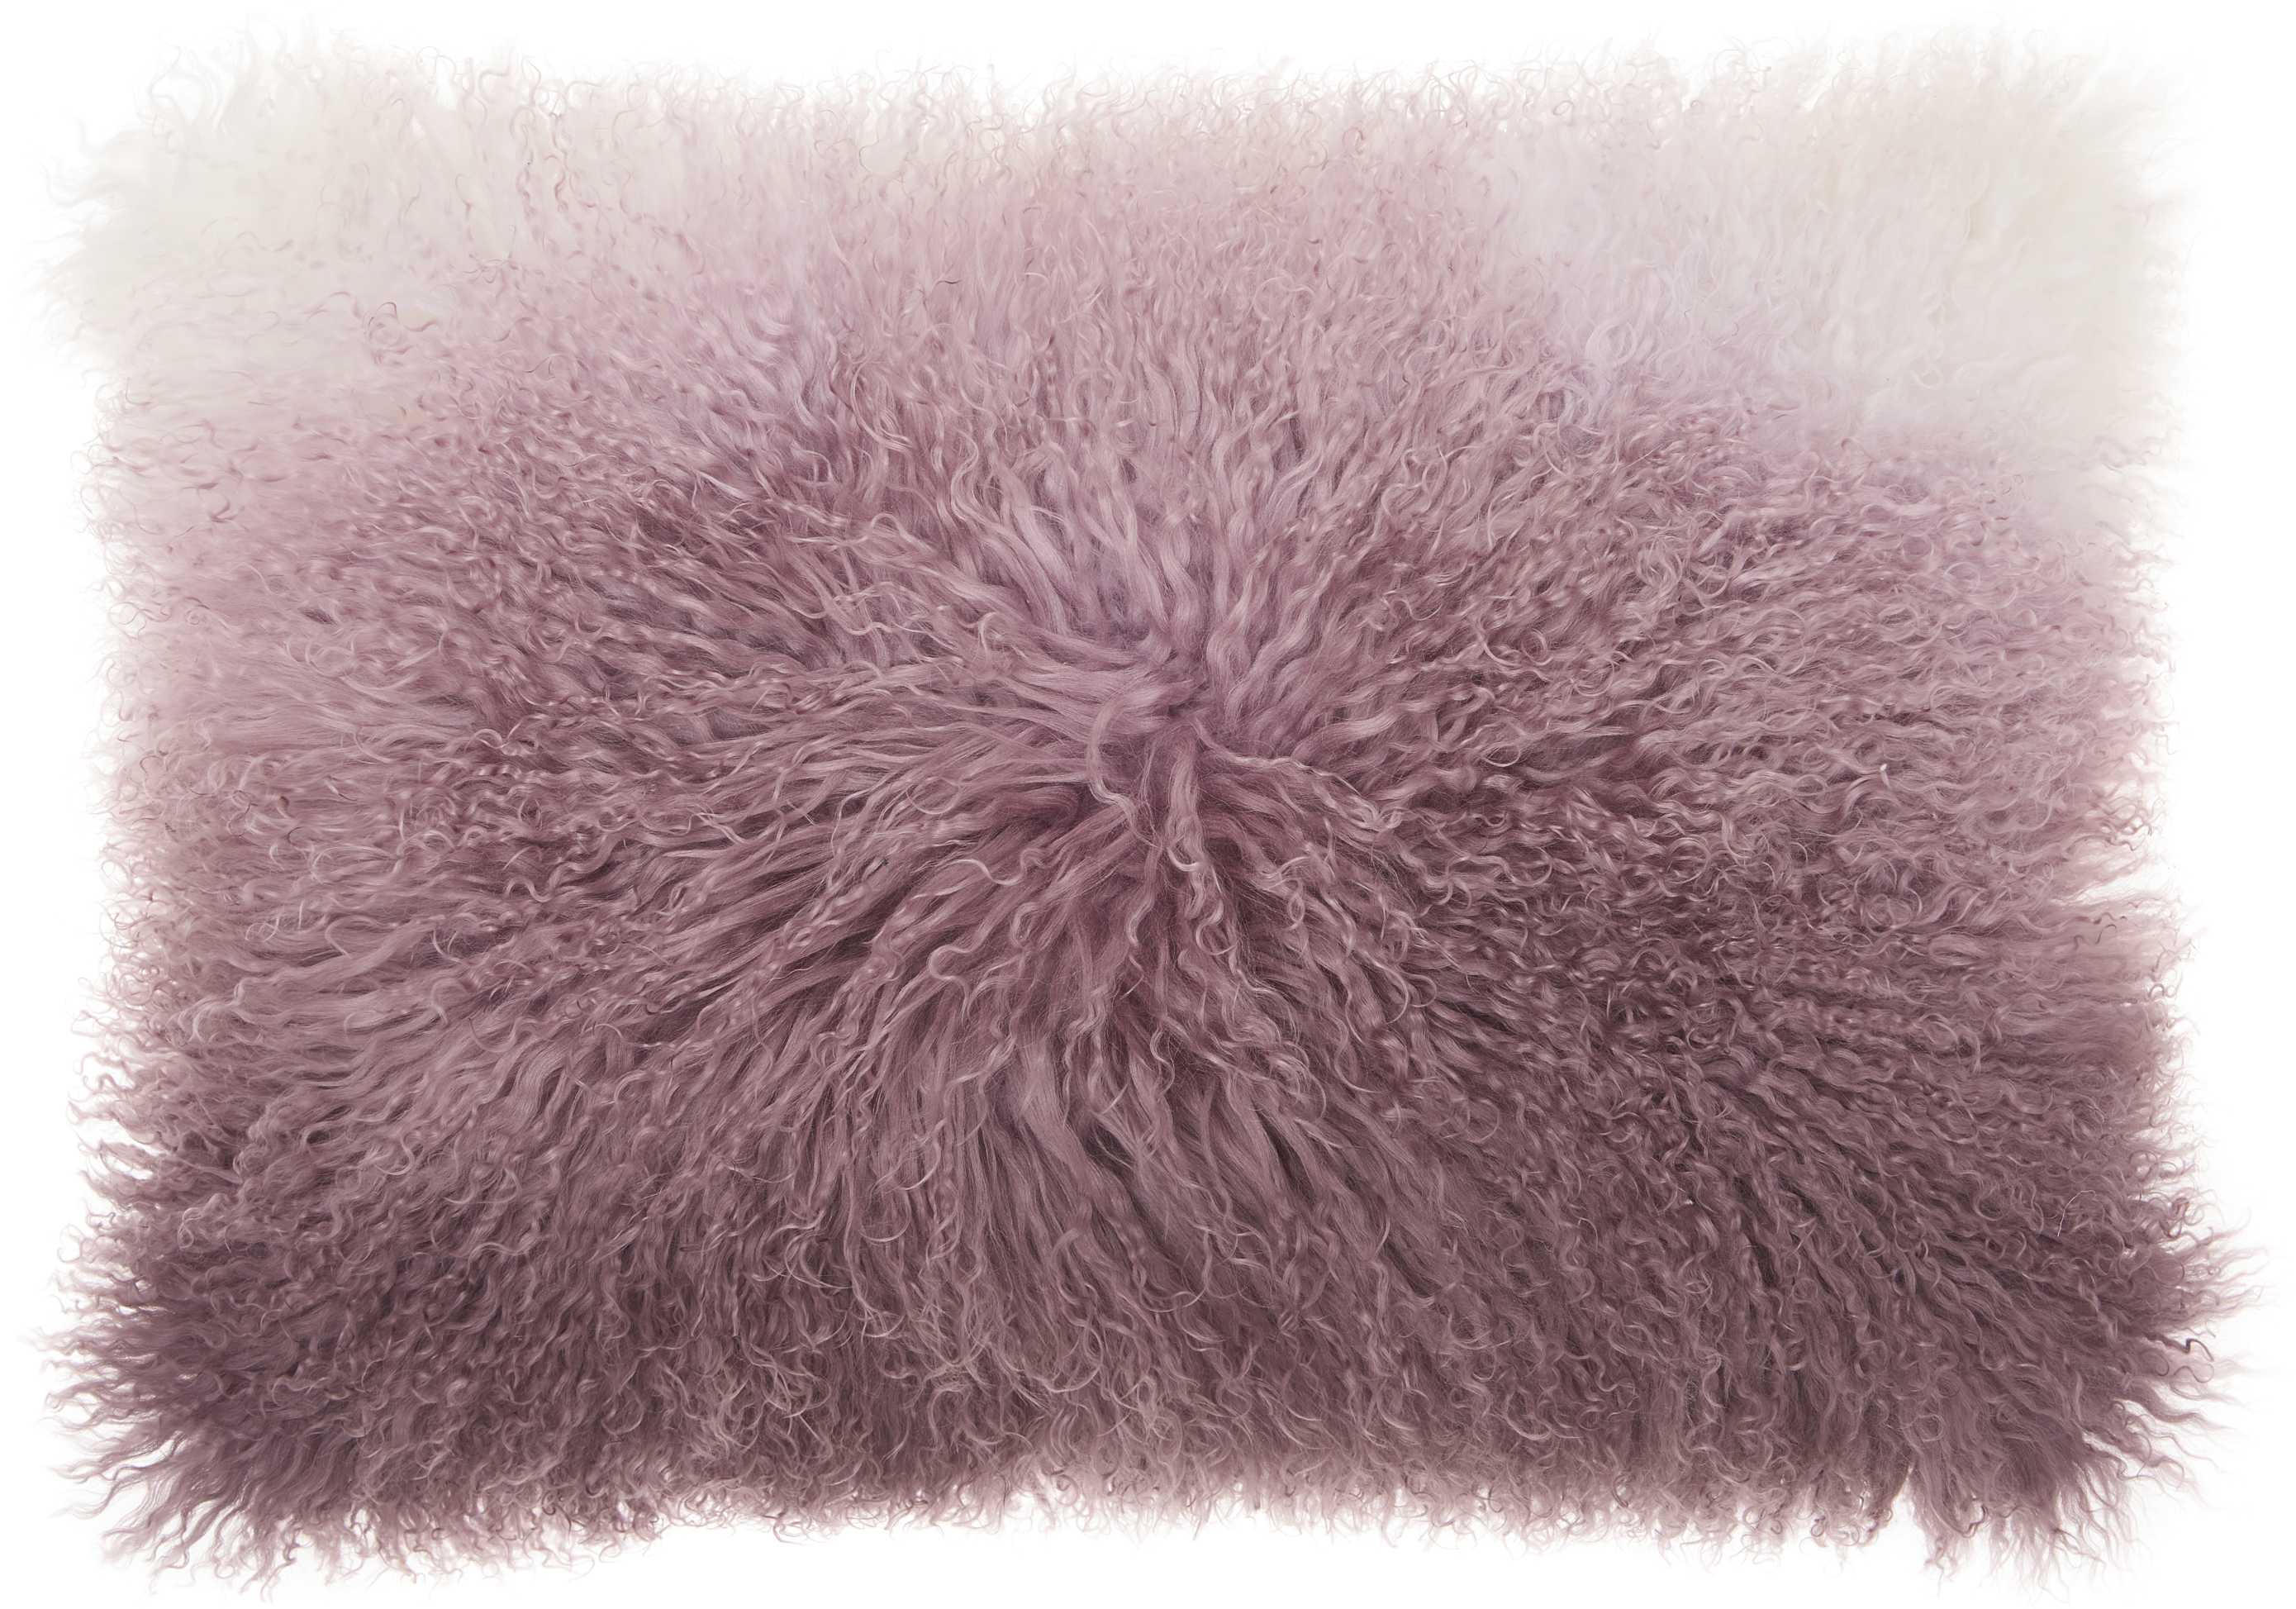 Couture fur pillow made of Tibetan lamp wool from Nourison